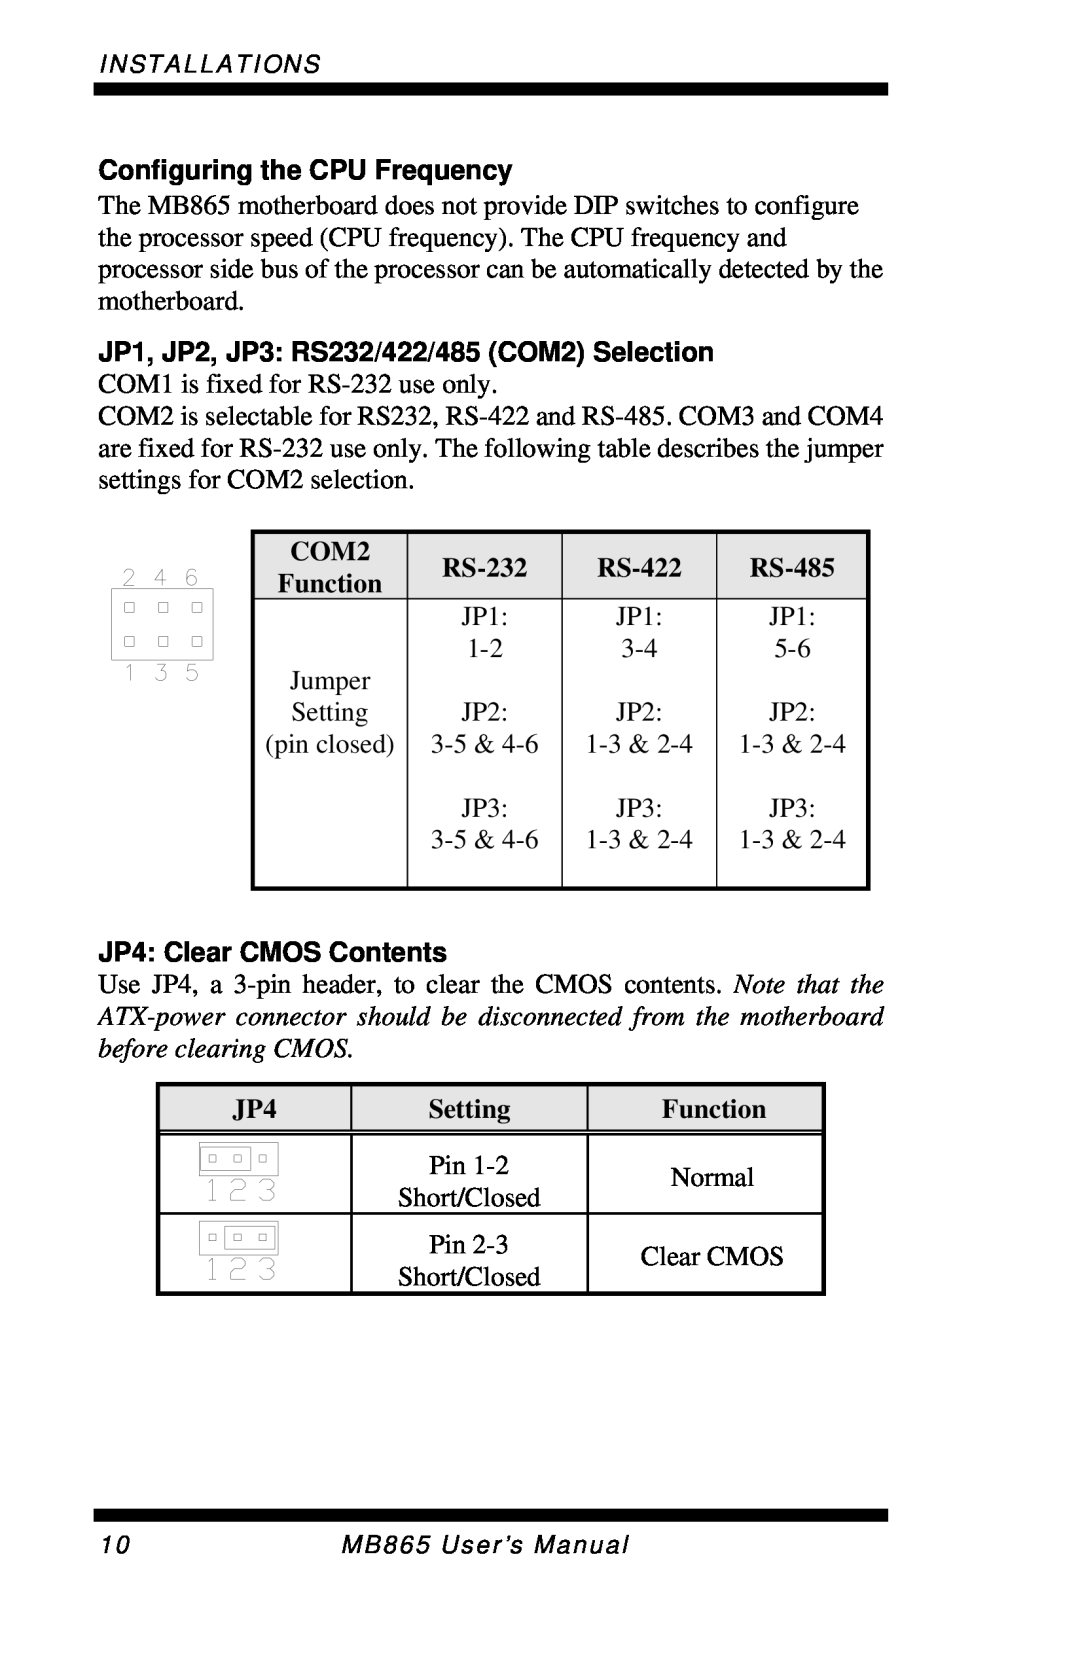 Intel MB865 Configuring the CPU Frequency, COM2, RS-232, Function, RS-422, RS-485, JP4 Clear CMOS Contents, Setting 